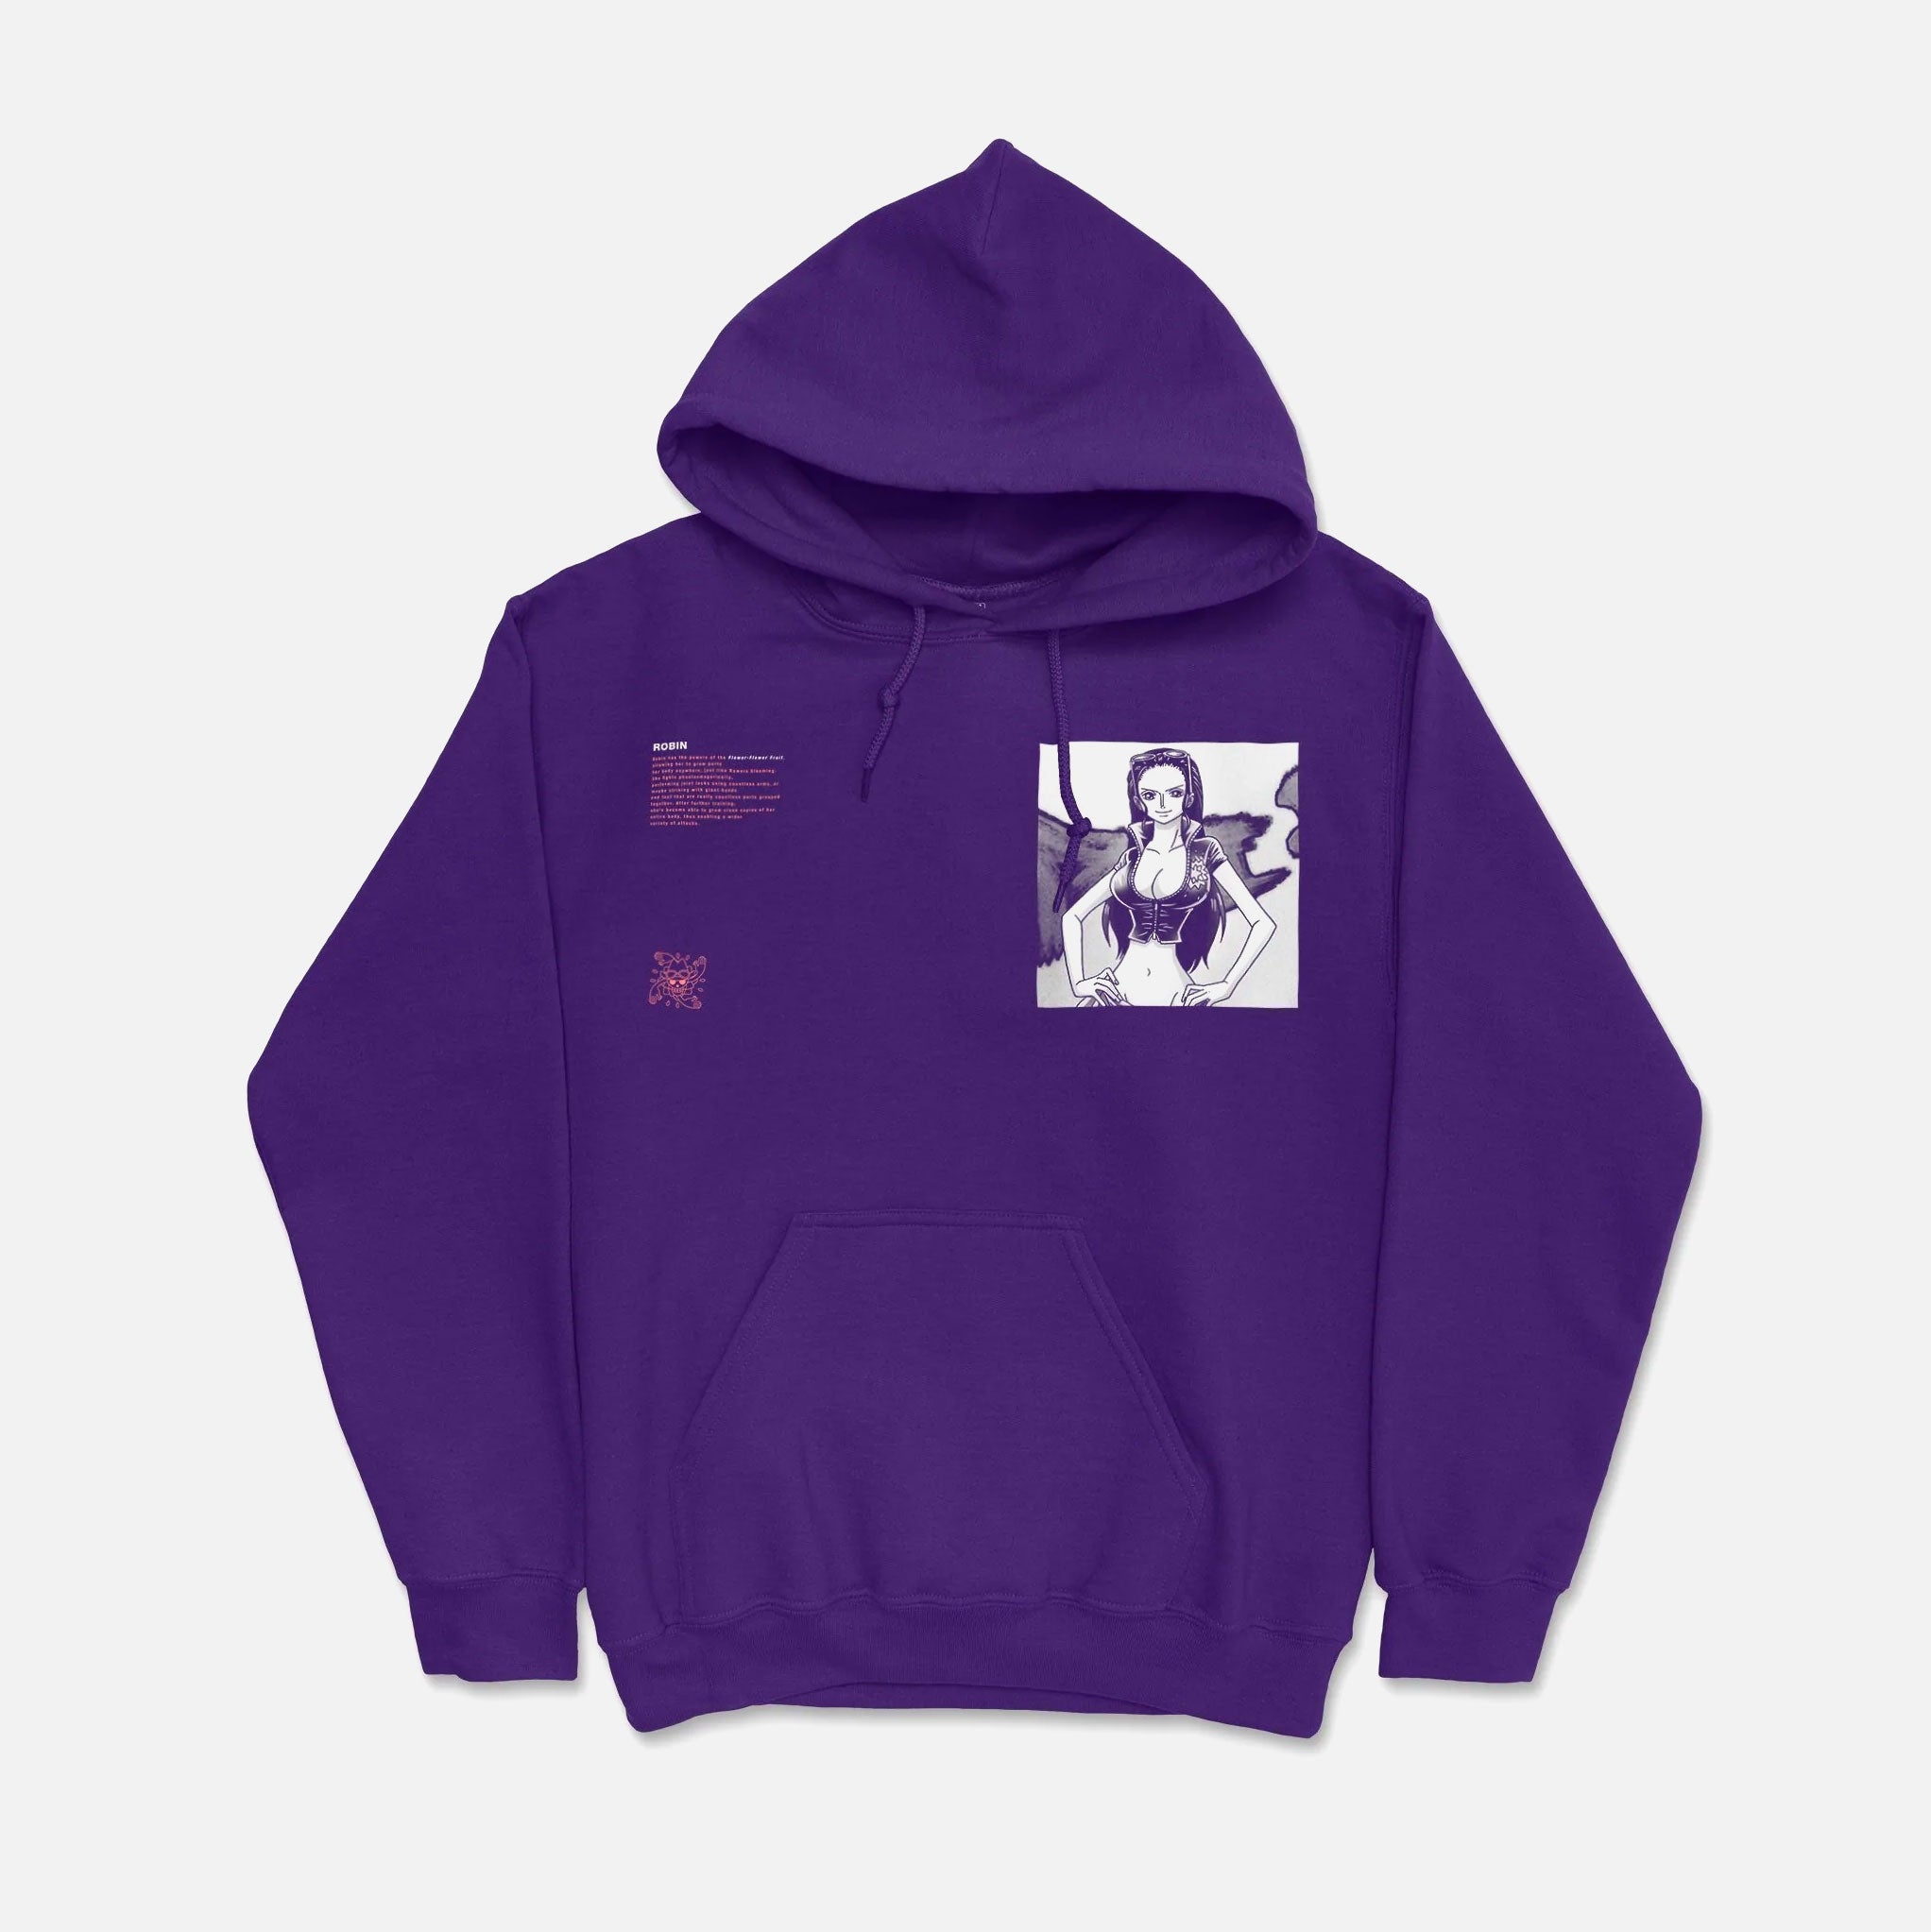 One Piece - Nico Robin Devil Child Hoodie - Crunchyroll Exclusive! image count 1